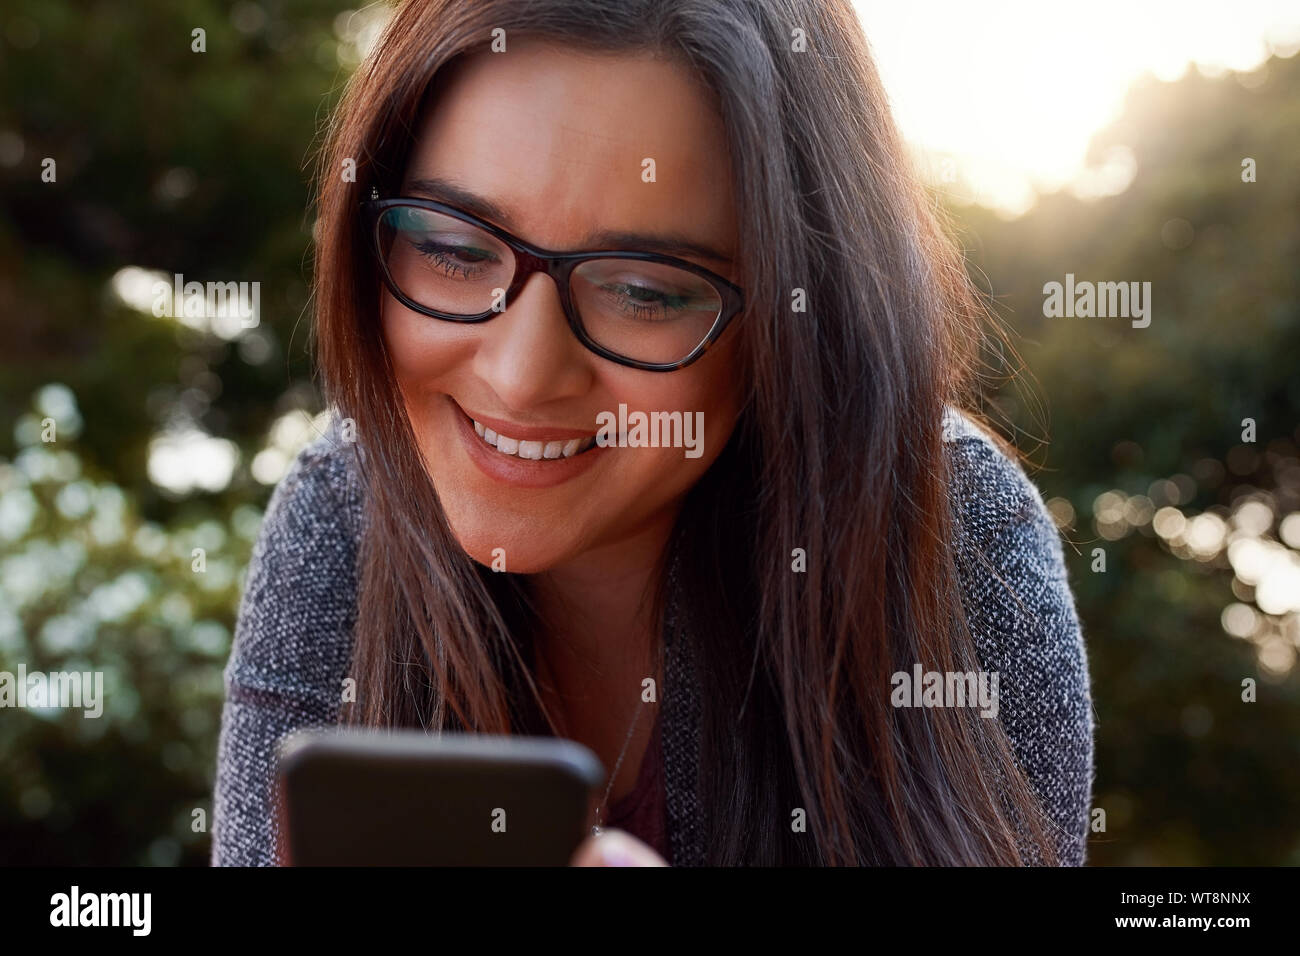 Close-up of smiling young woman wearing black eyeglasses using smart phone at outdoors Stock Photo